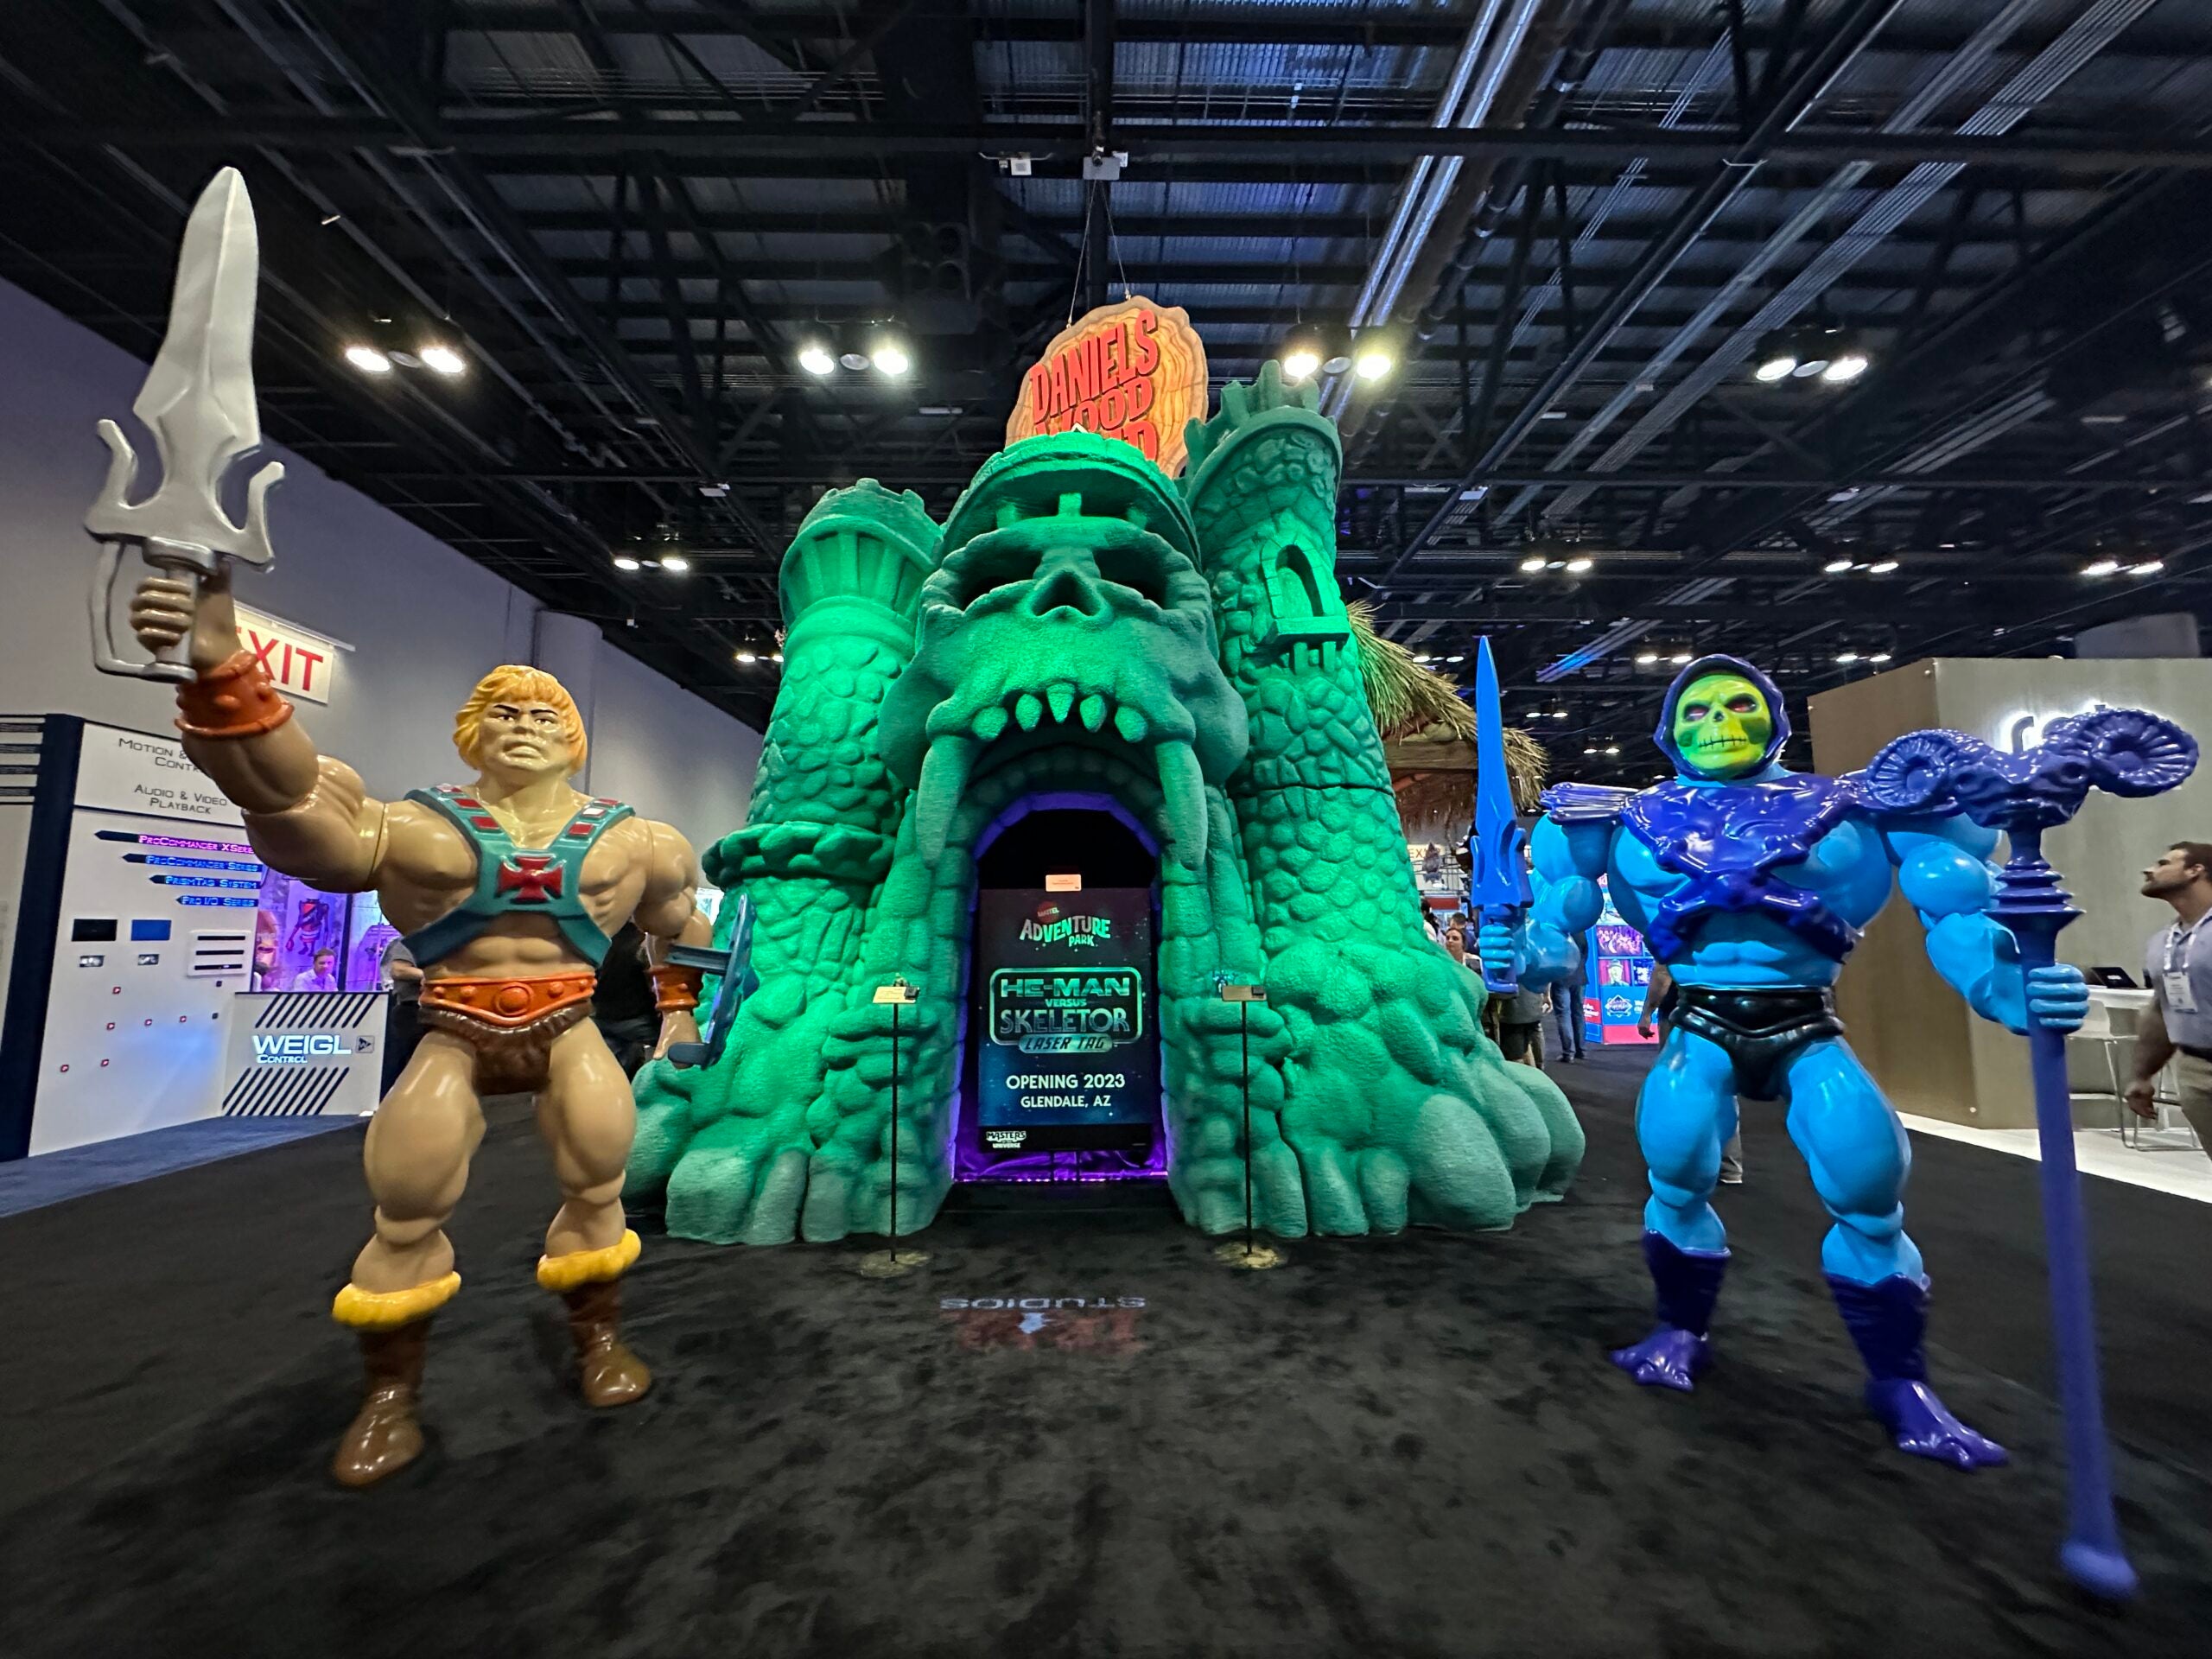 Everything We Know About the New Mattel Adventure Park - Inside the Magic